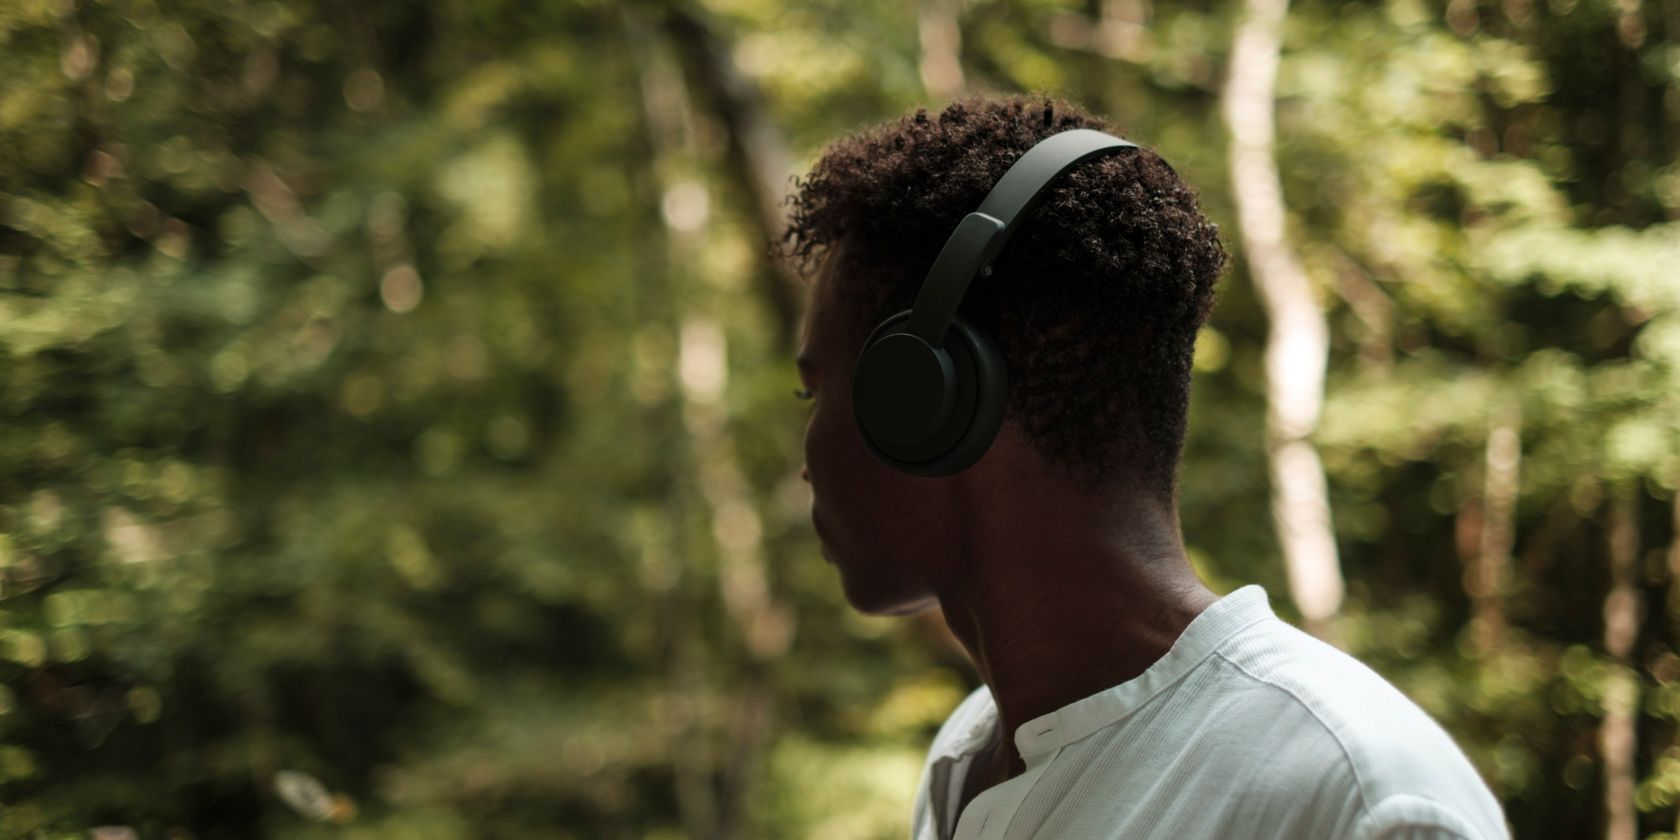 Screenshot showing a man looking into a forest wearing headphones